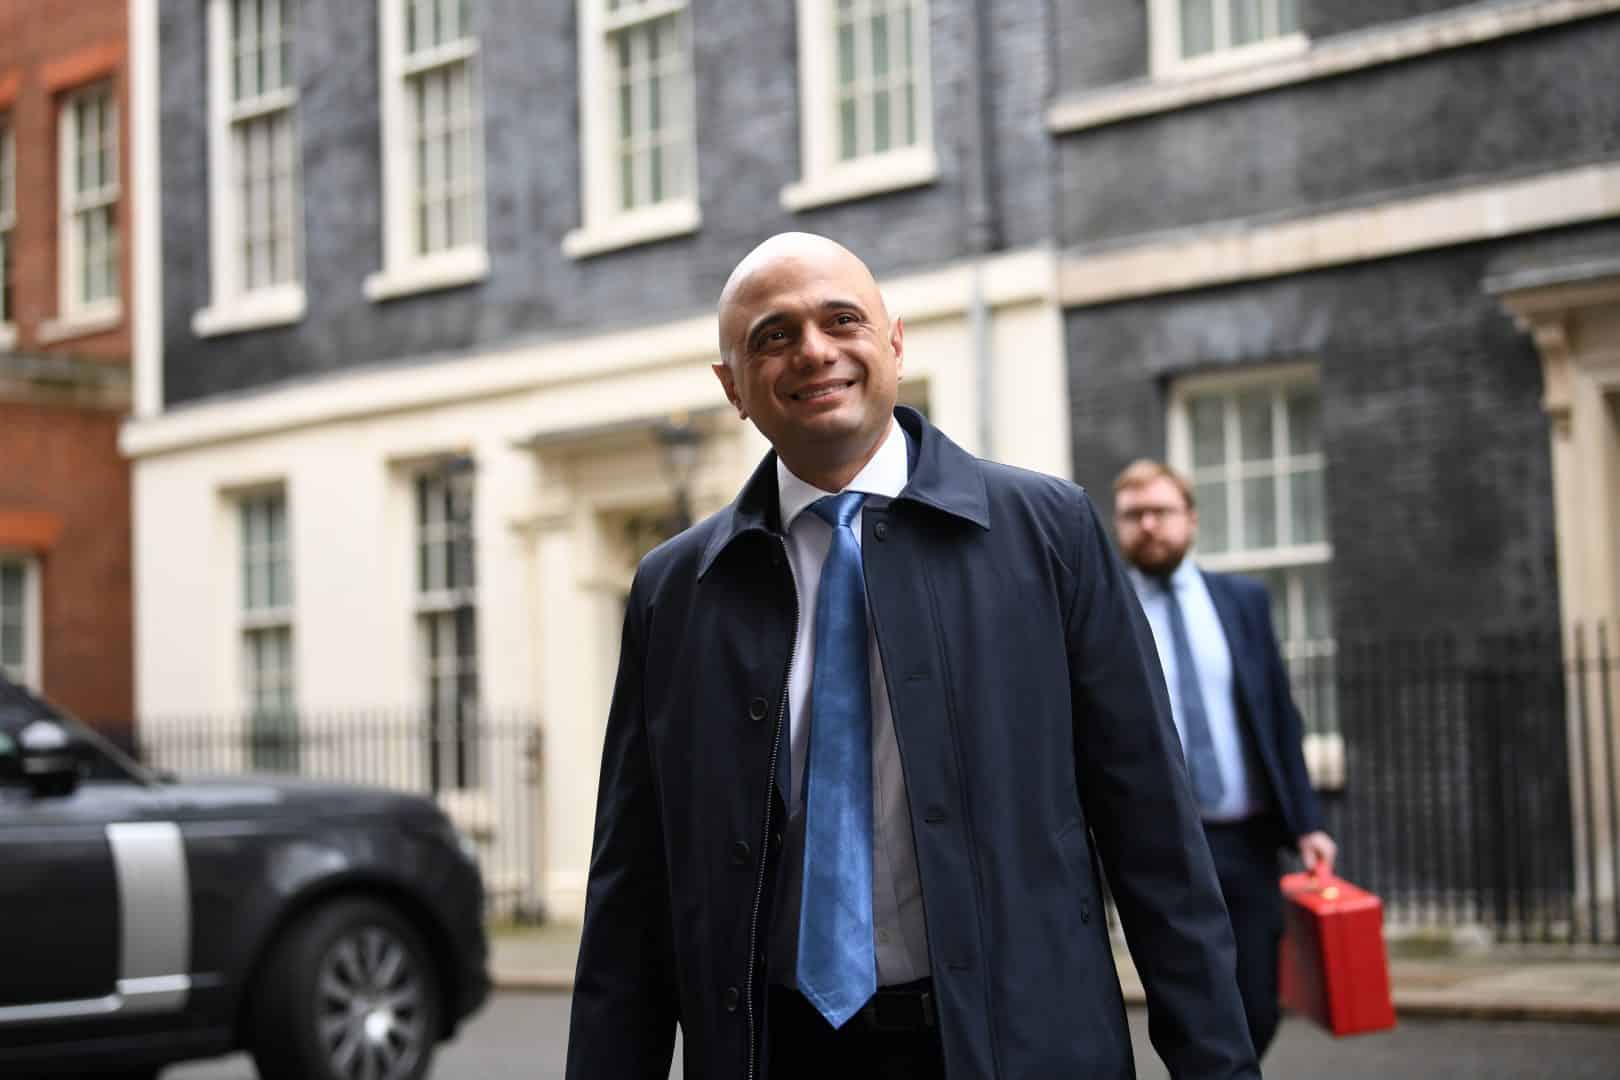 Sajid Javid abandons pre-election pledge to end austerity – after just 4 months